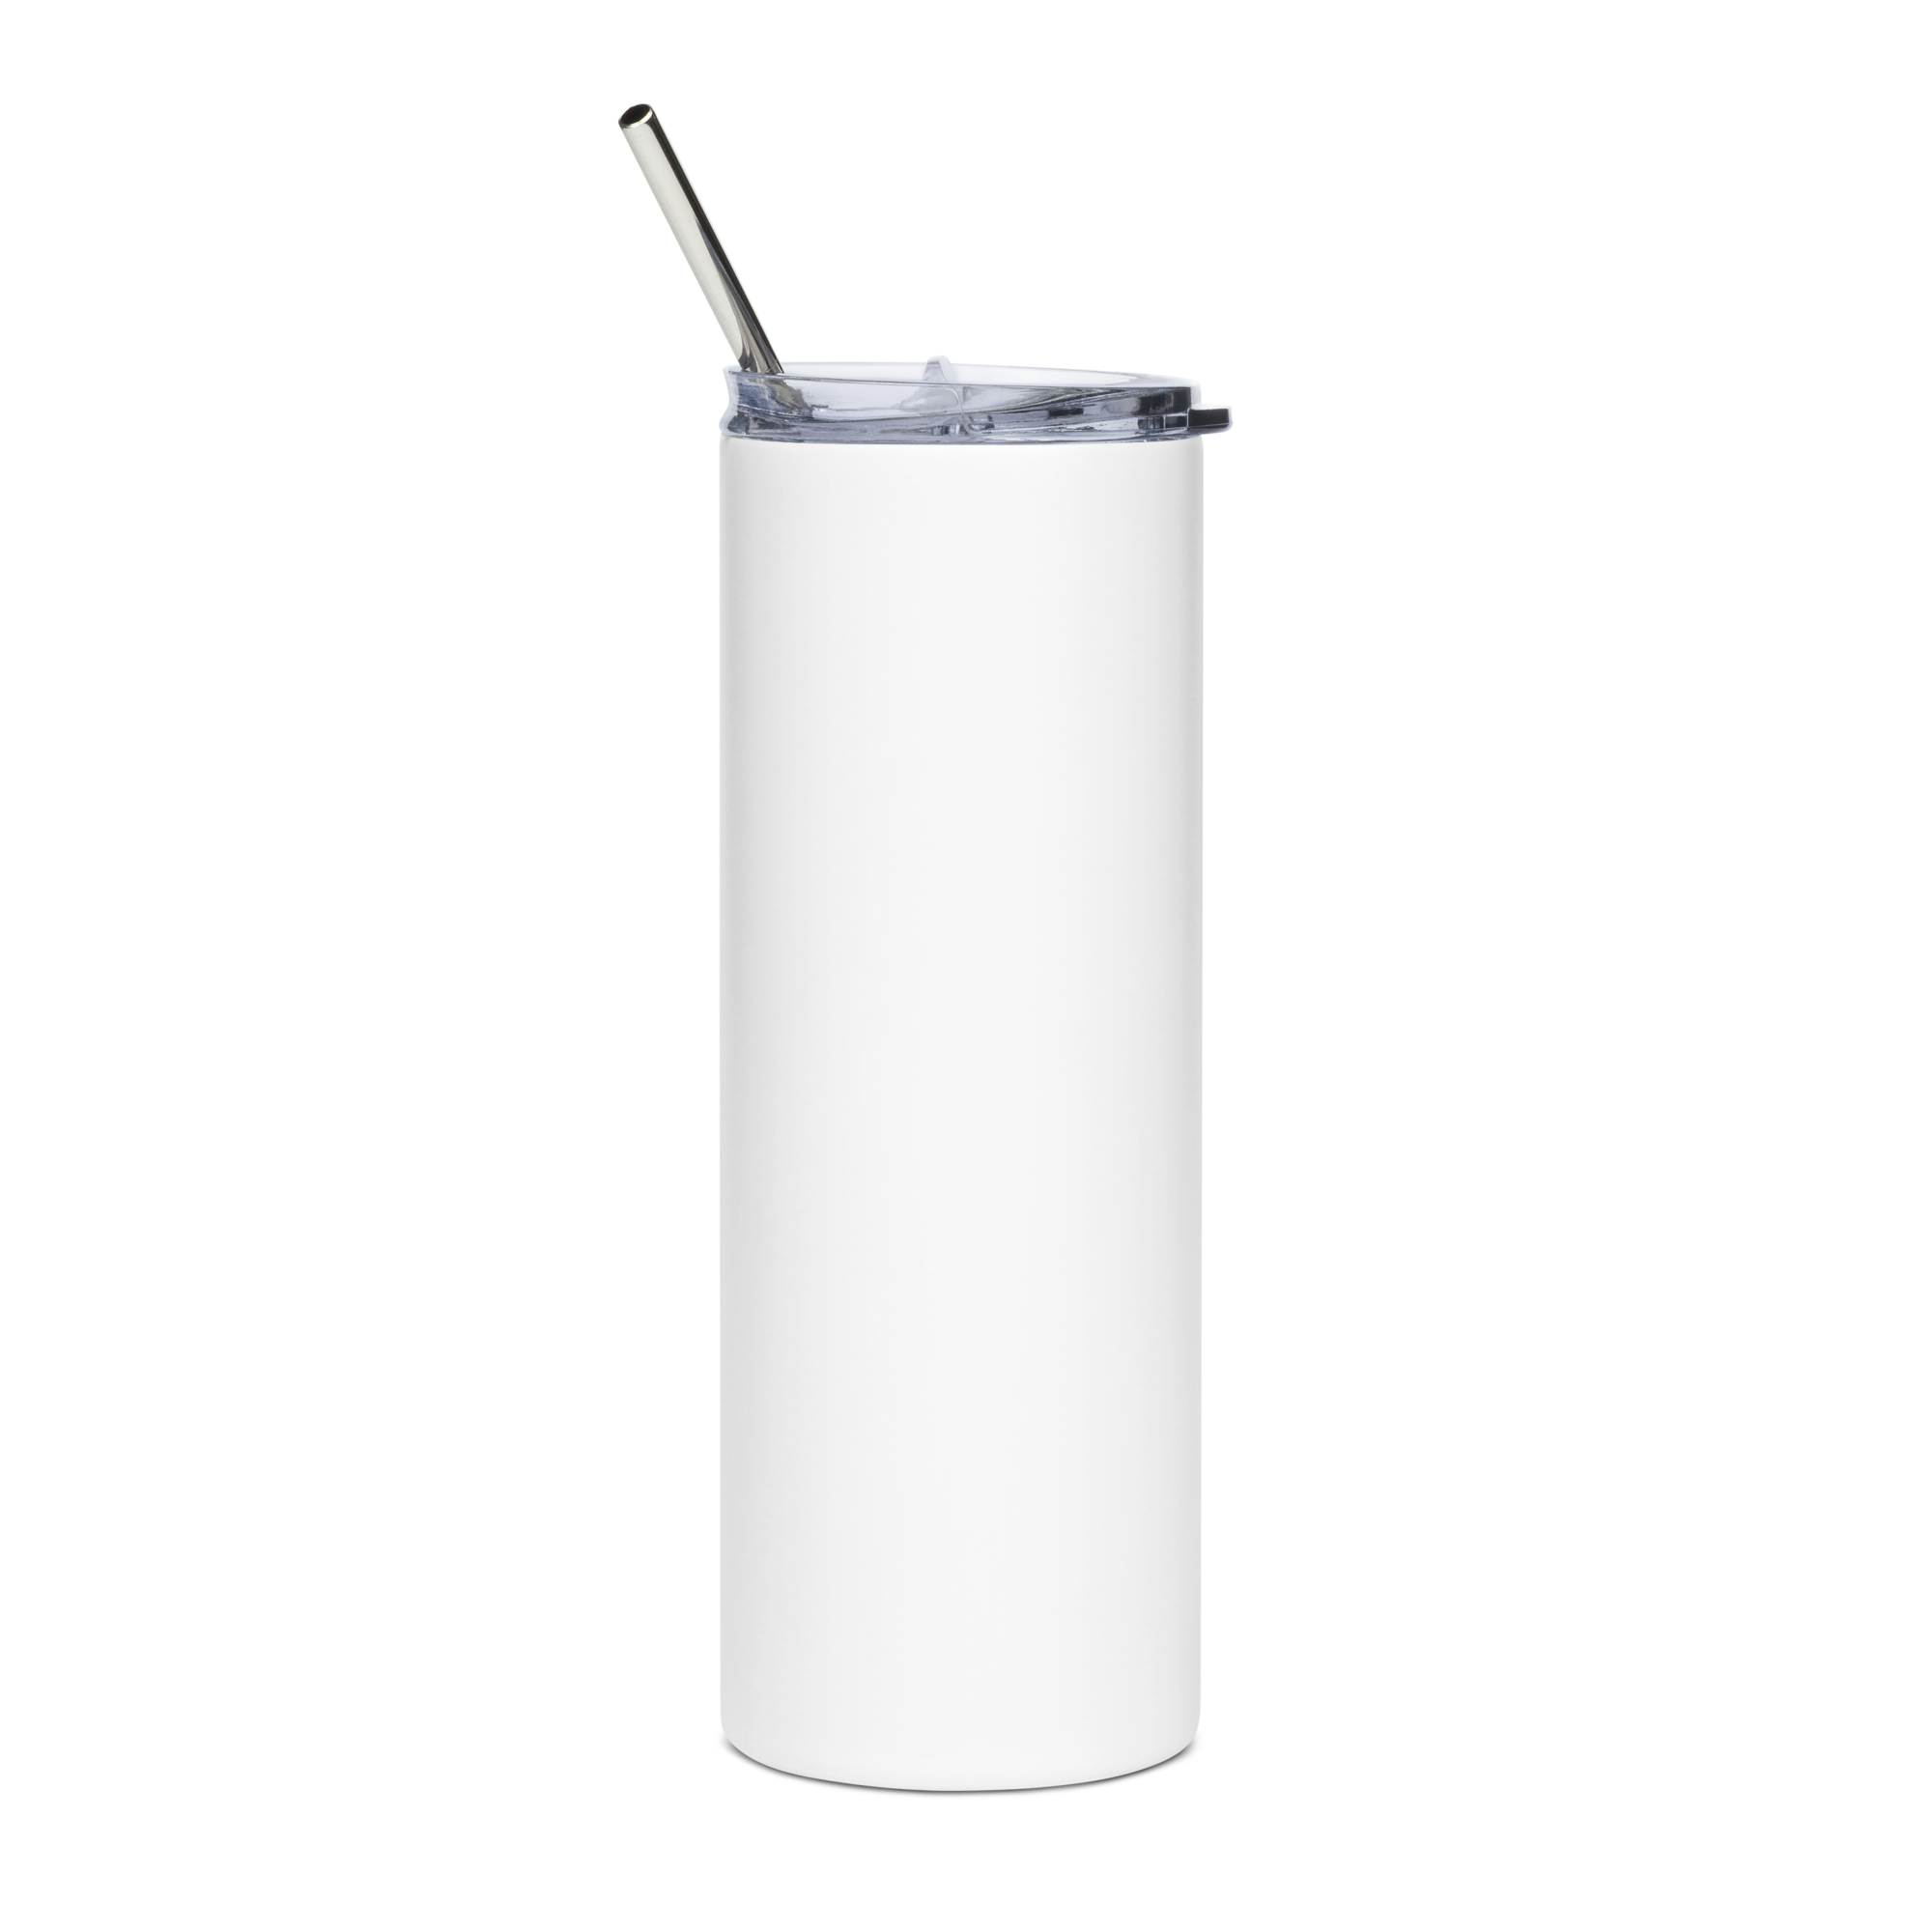 Poolosophy Stainless Steel Tumbler